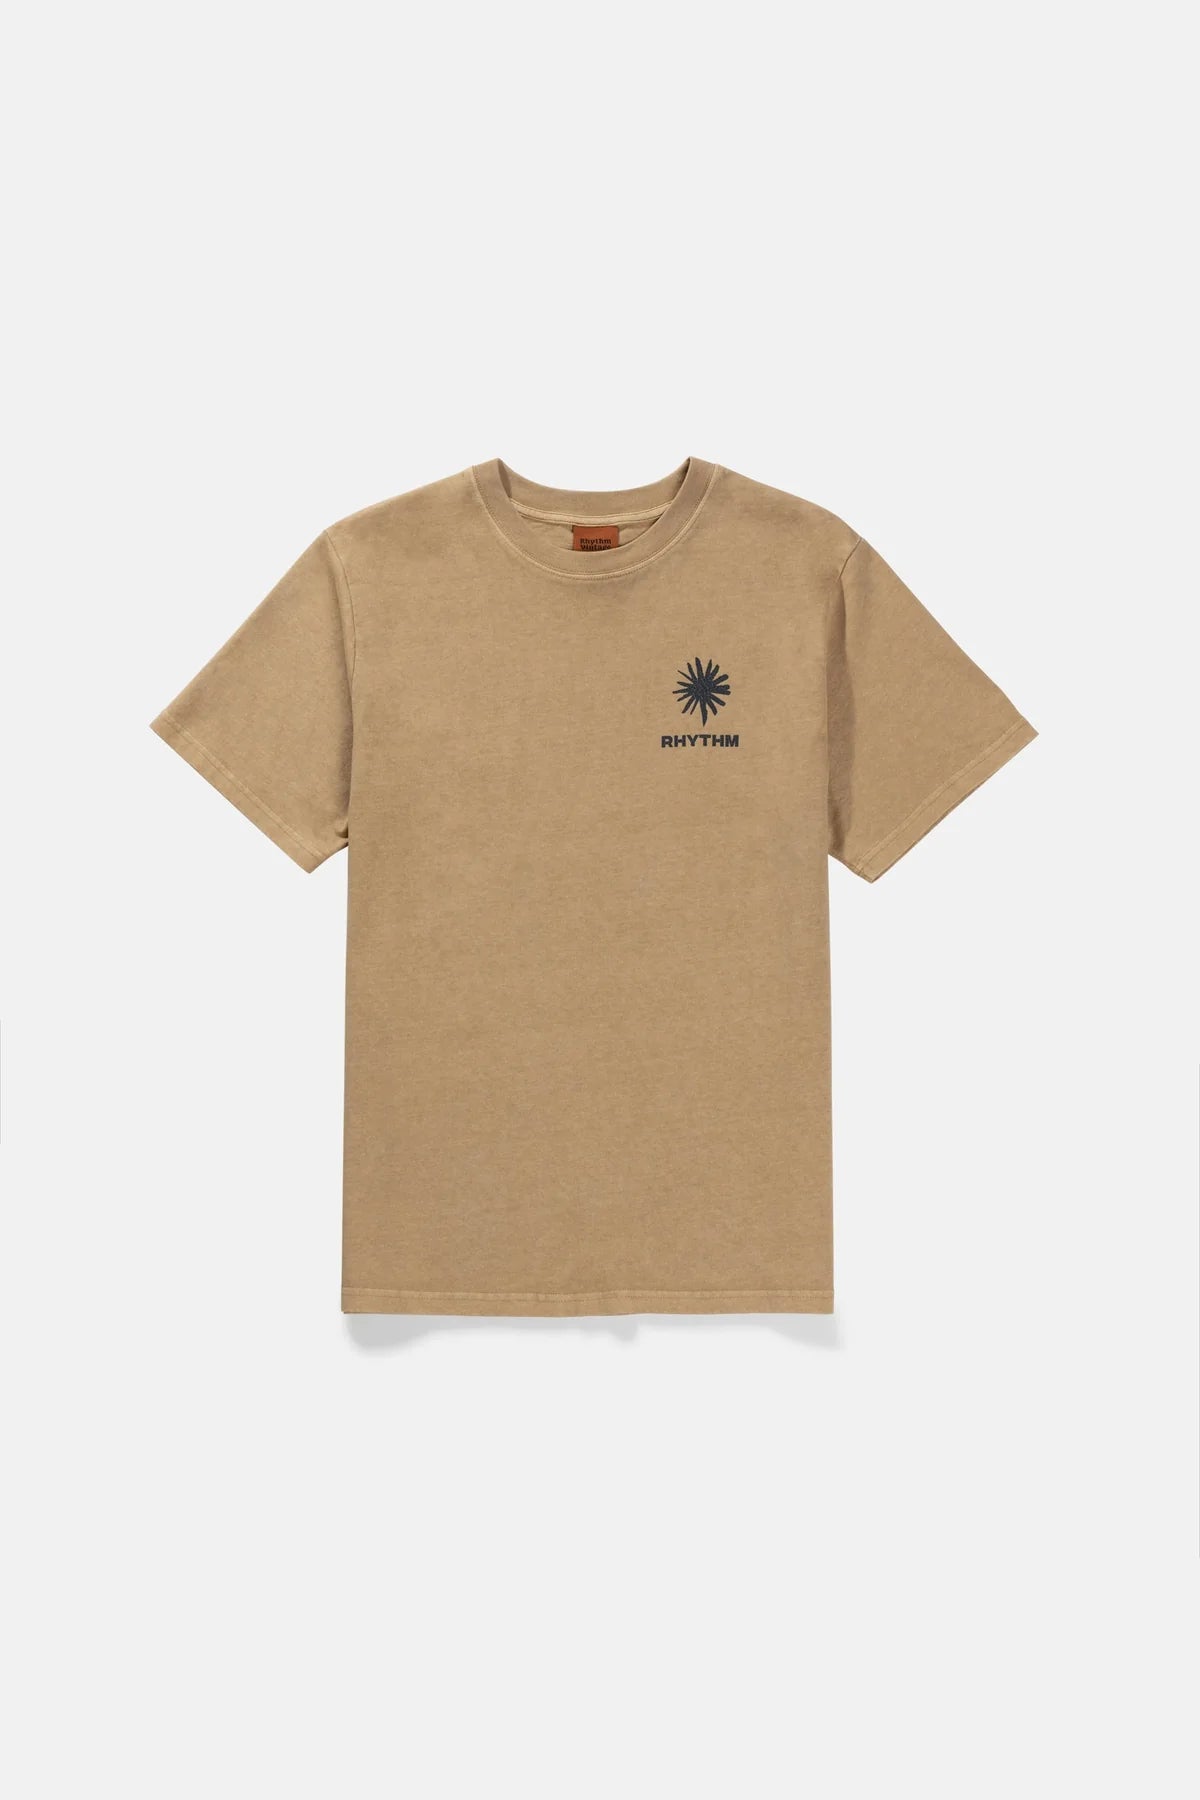 Zone Vintage Ss Tee - Incense